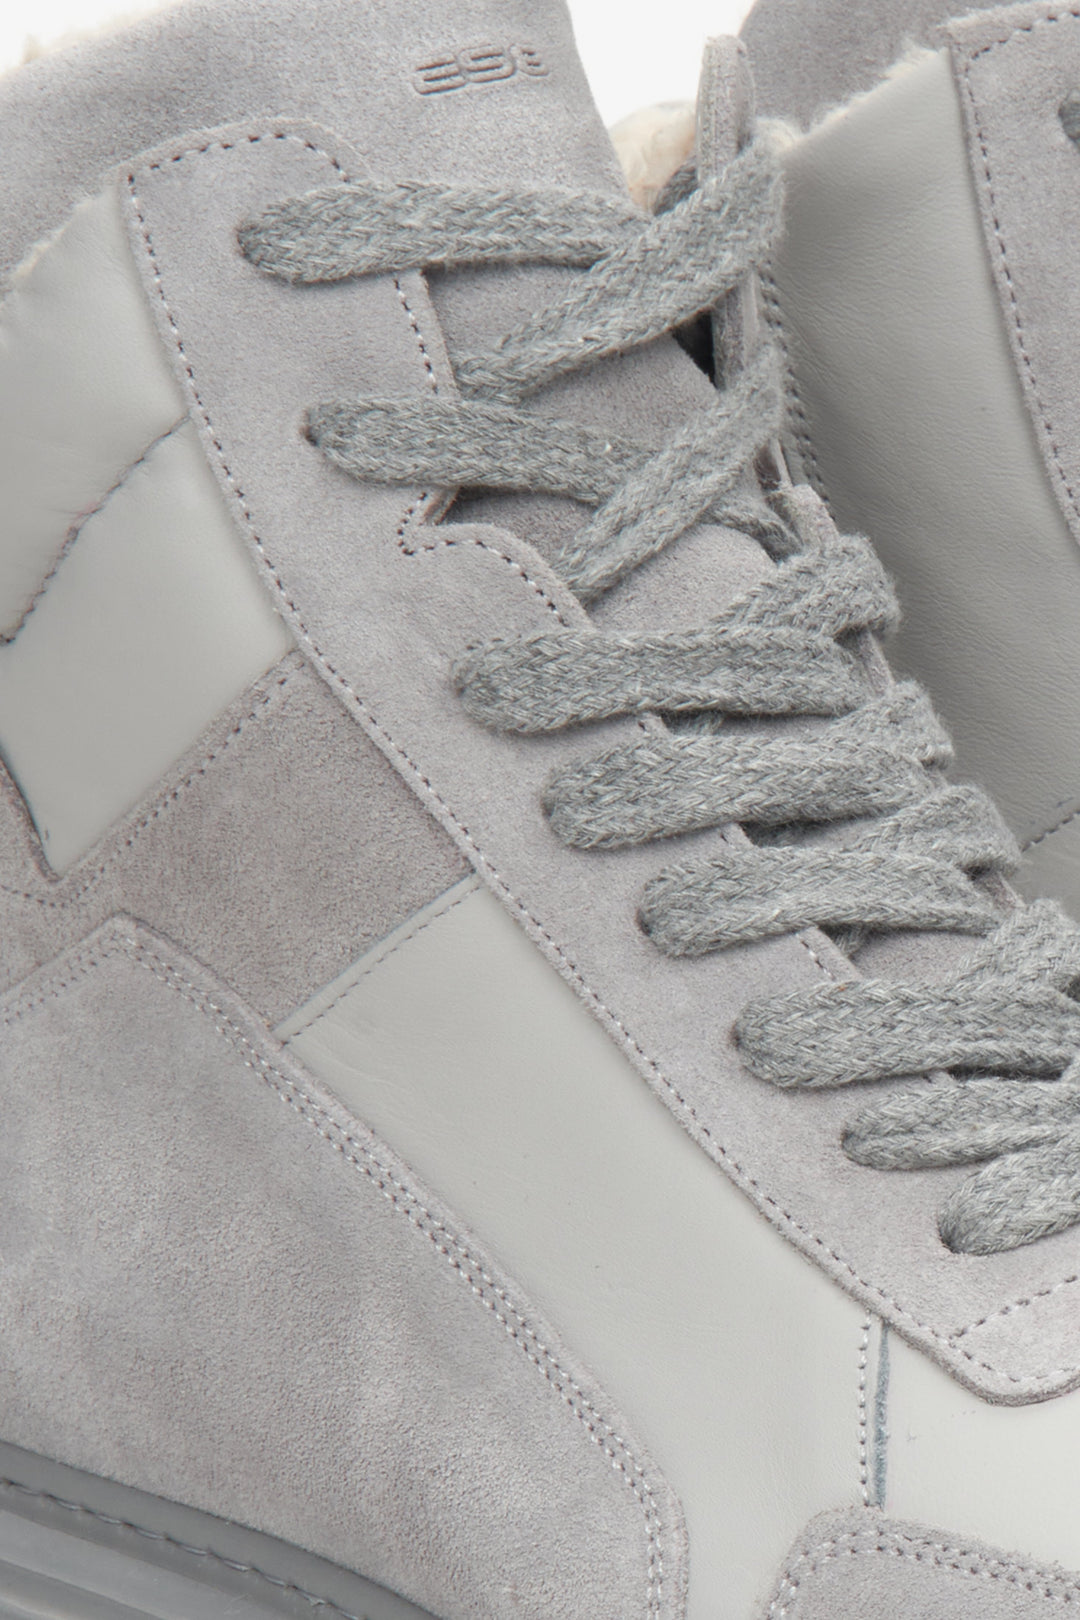 Winter women's sneakers in grey - a close-up on details.